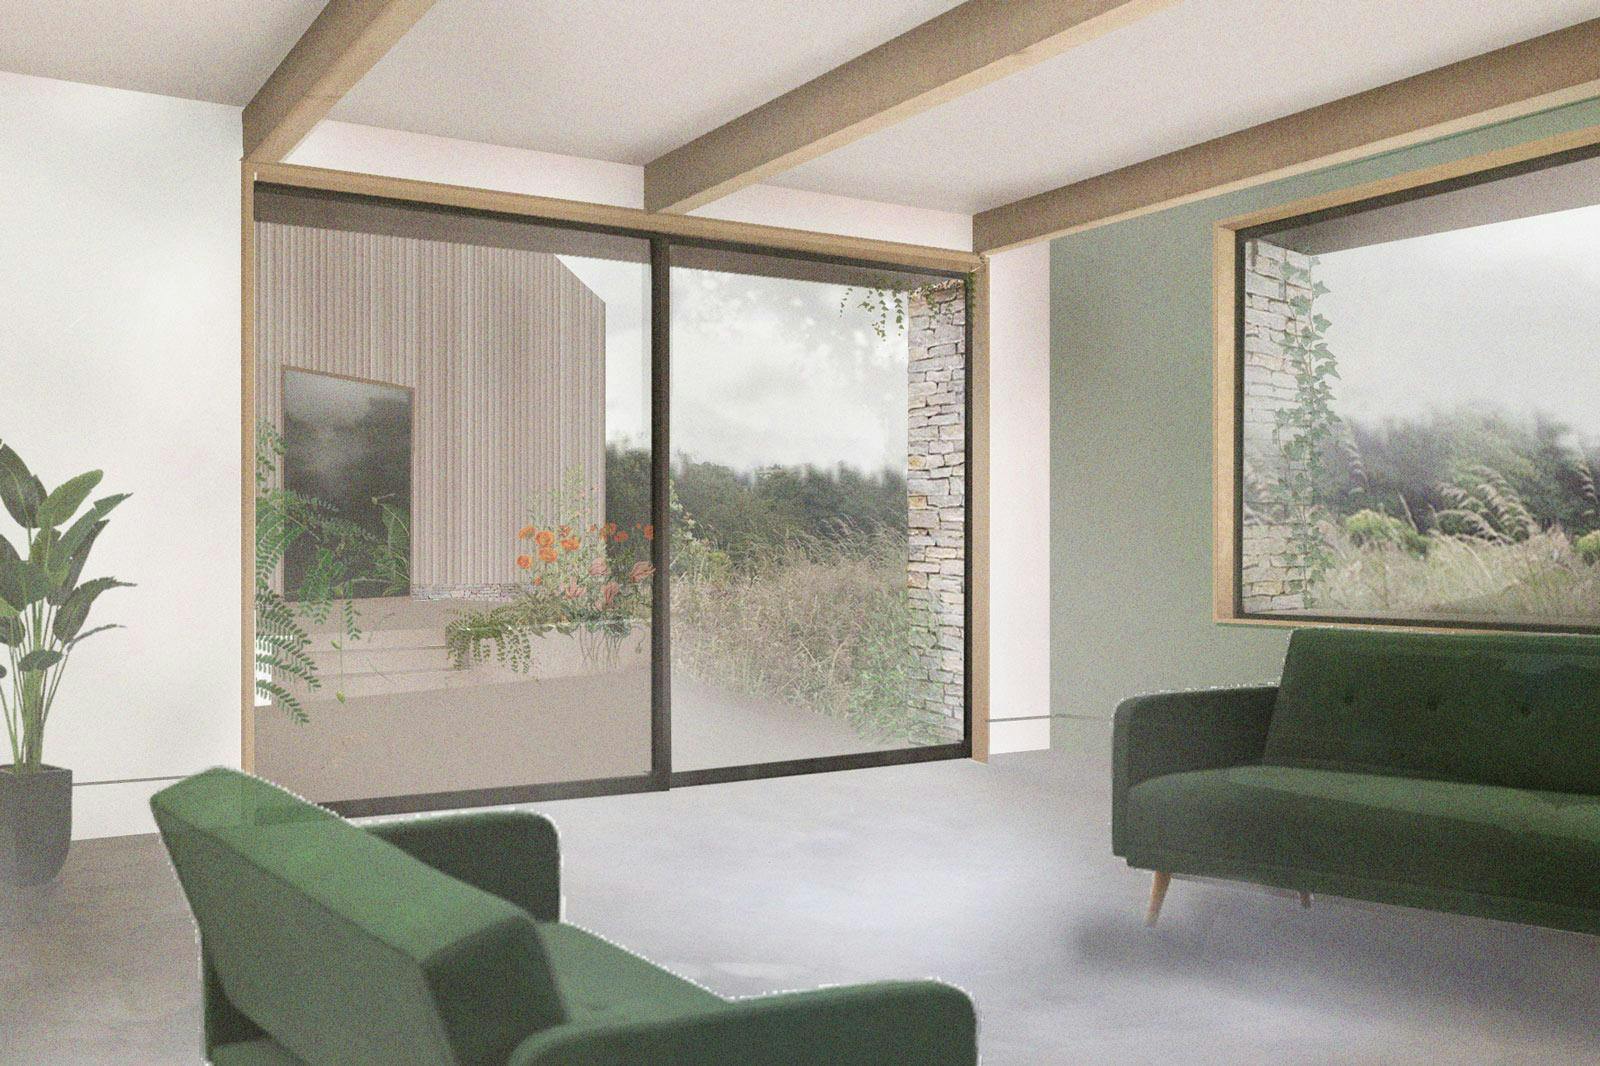 Internal render of Oolite House through the living room and into the stepped garden